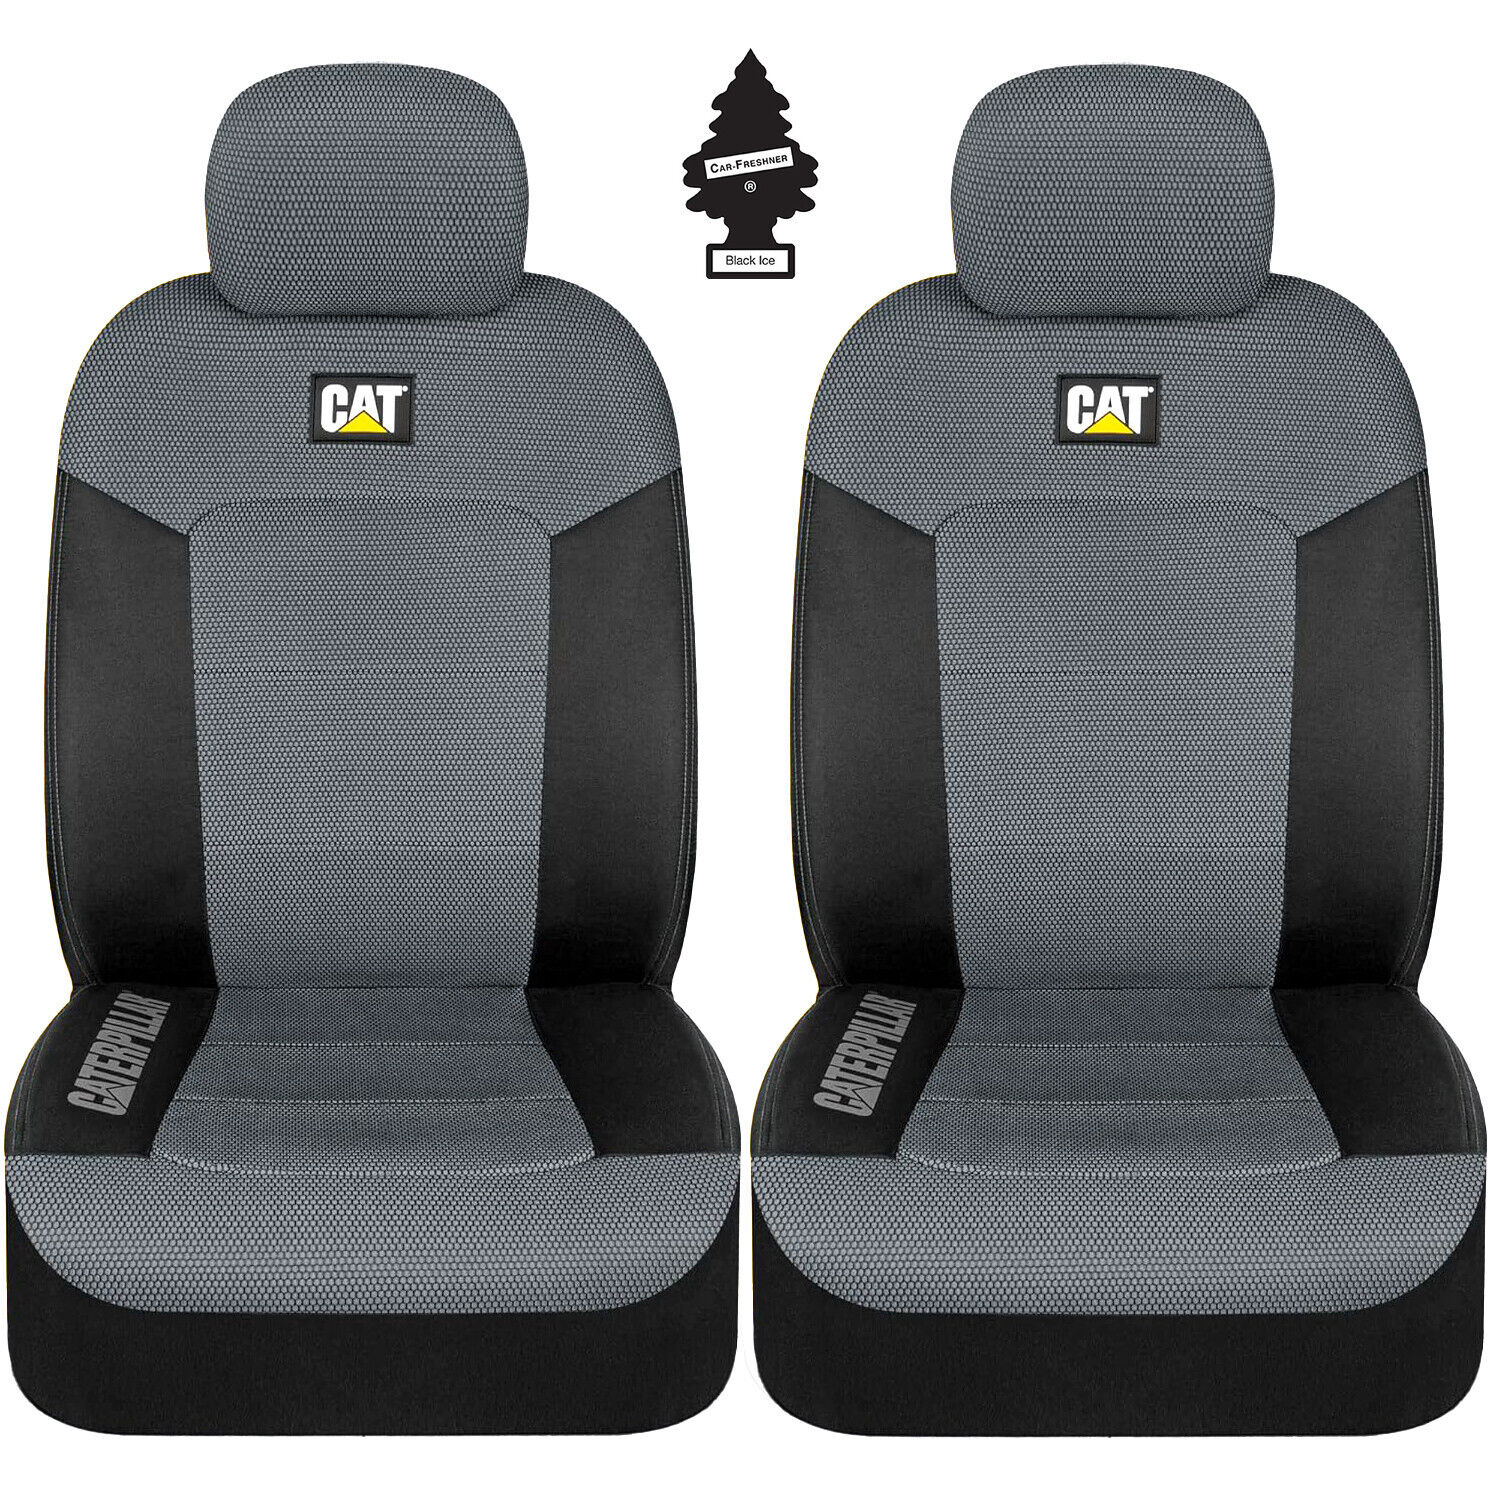 ⭐️⭐️⭐️⭐️⭐️New Caterpillar Car Truck Front Seat Covers Set Black GreyFor Toyota